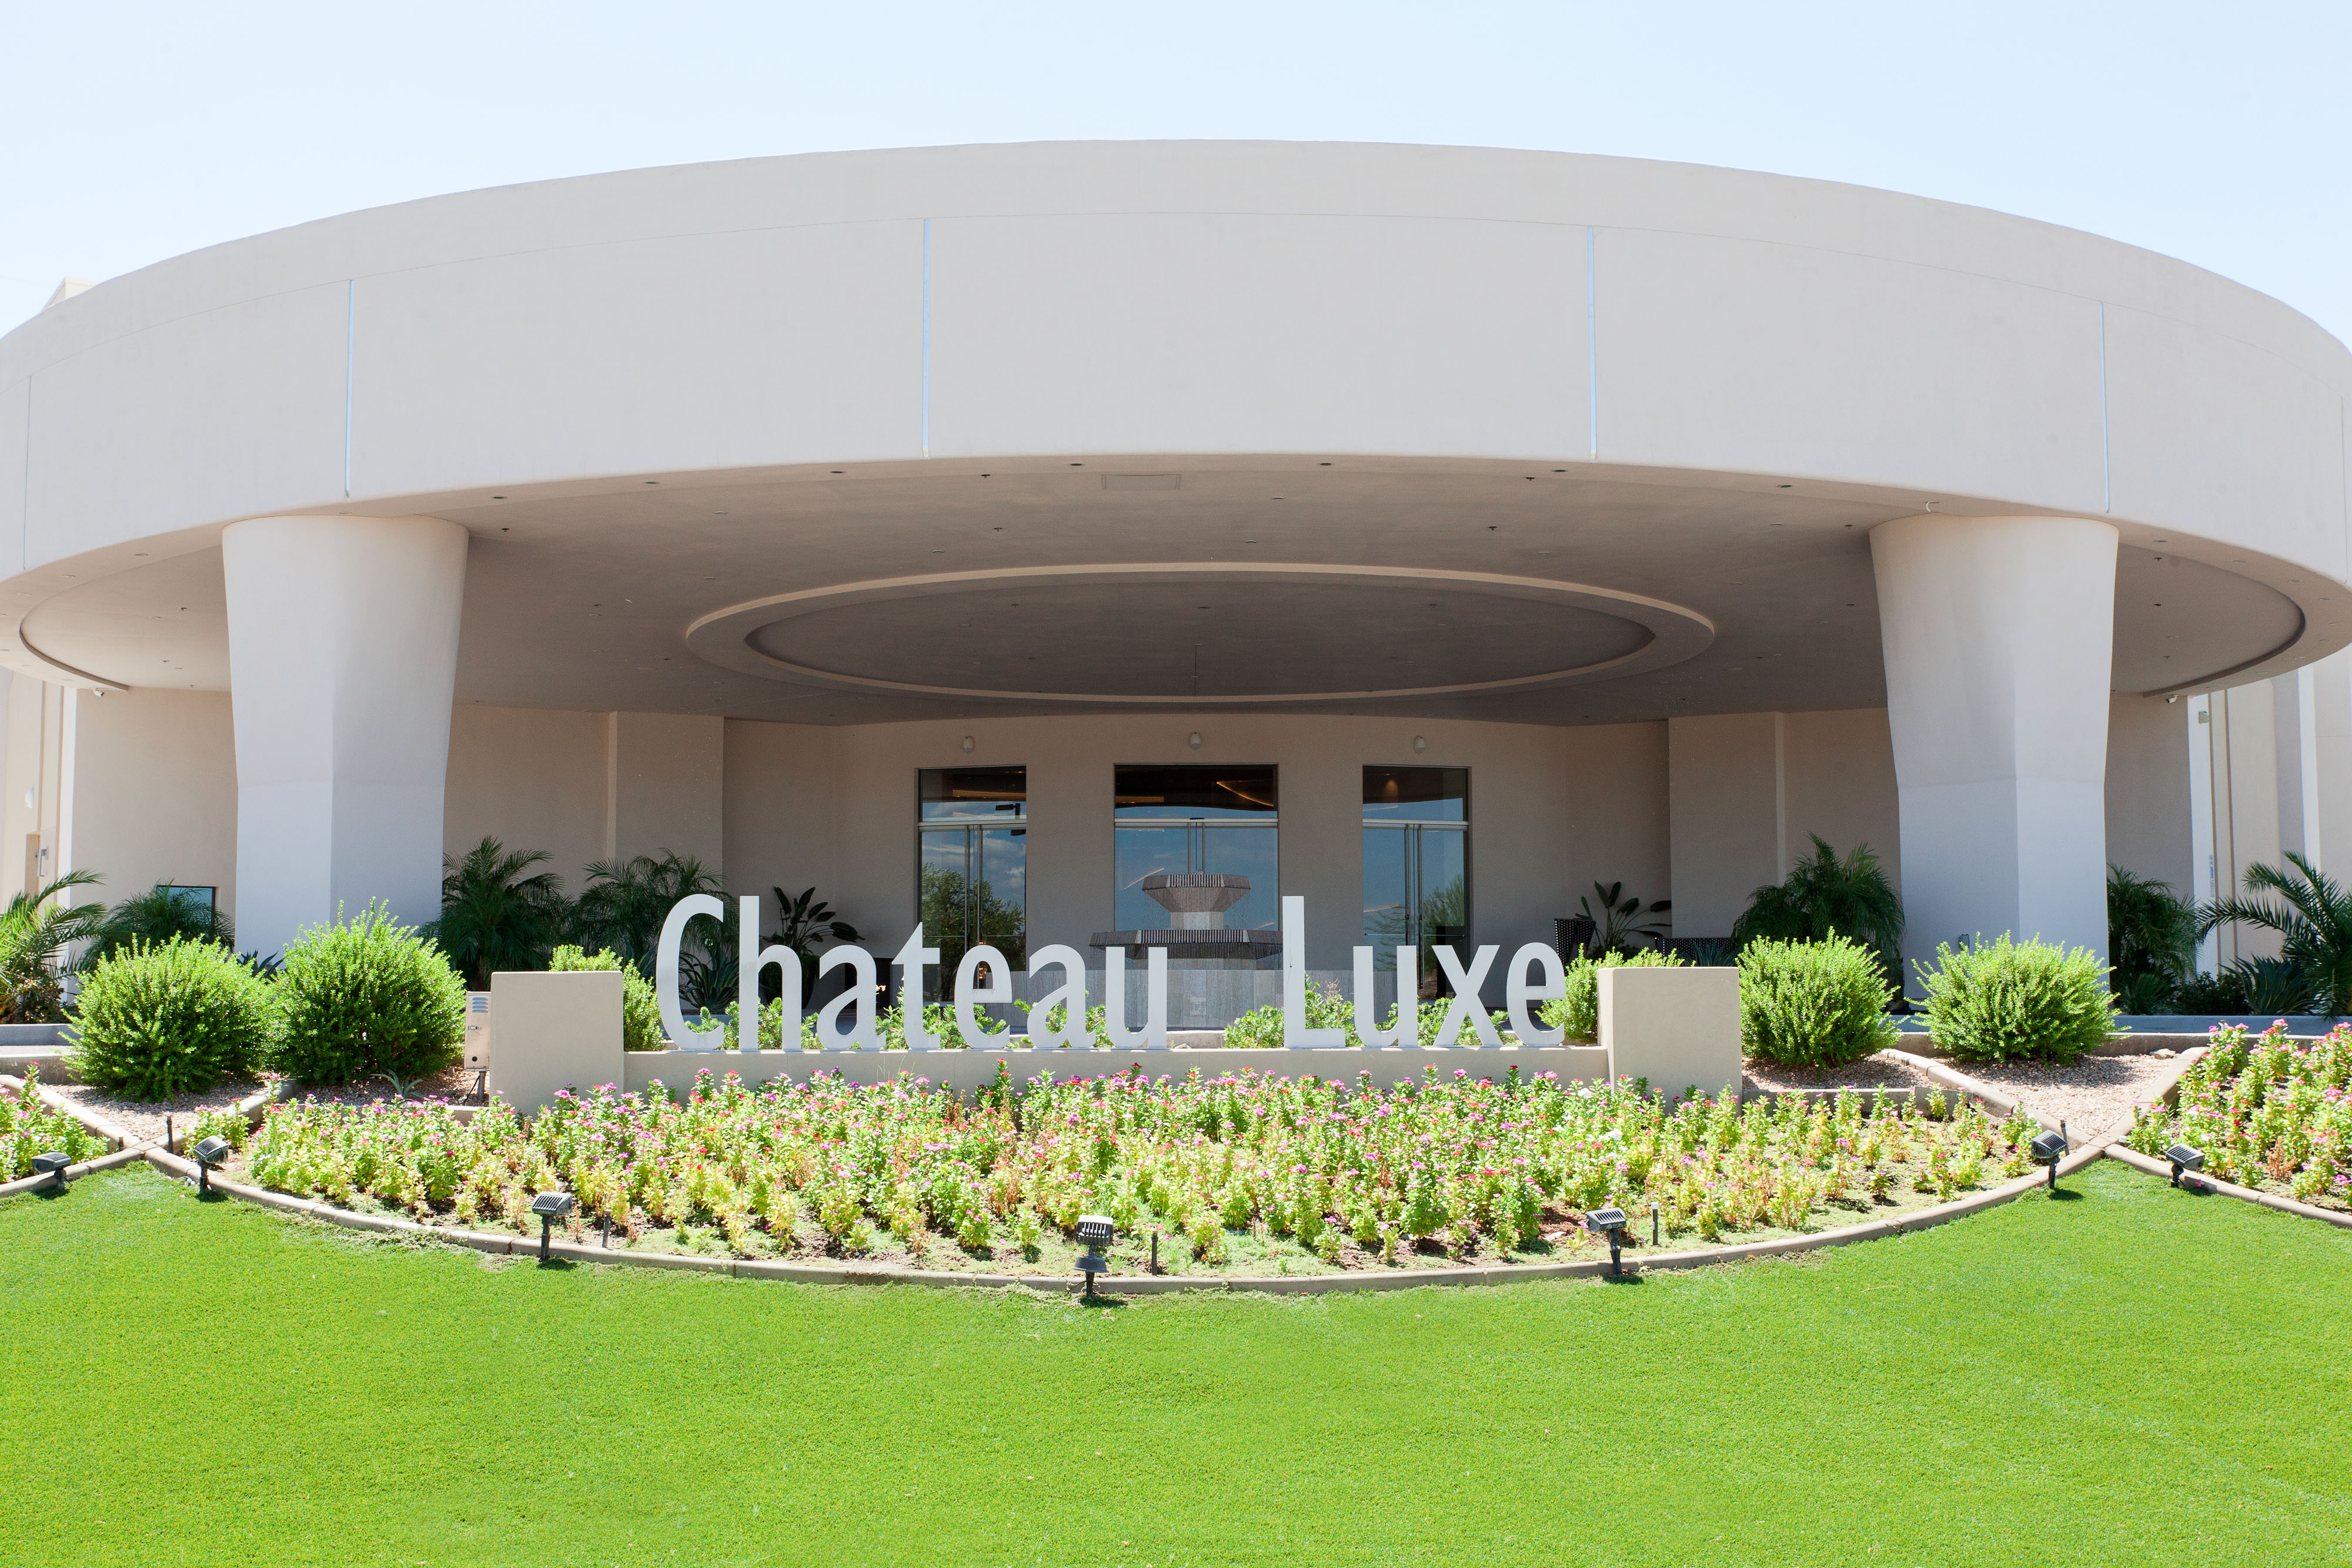 Featured Venue: Chateau Luxe